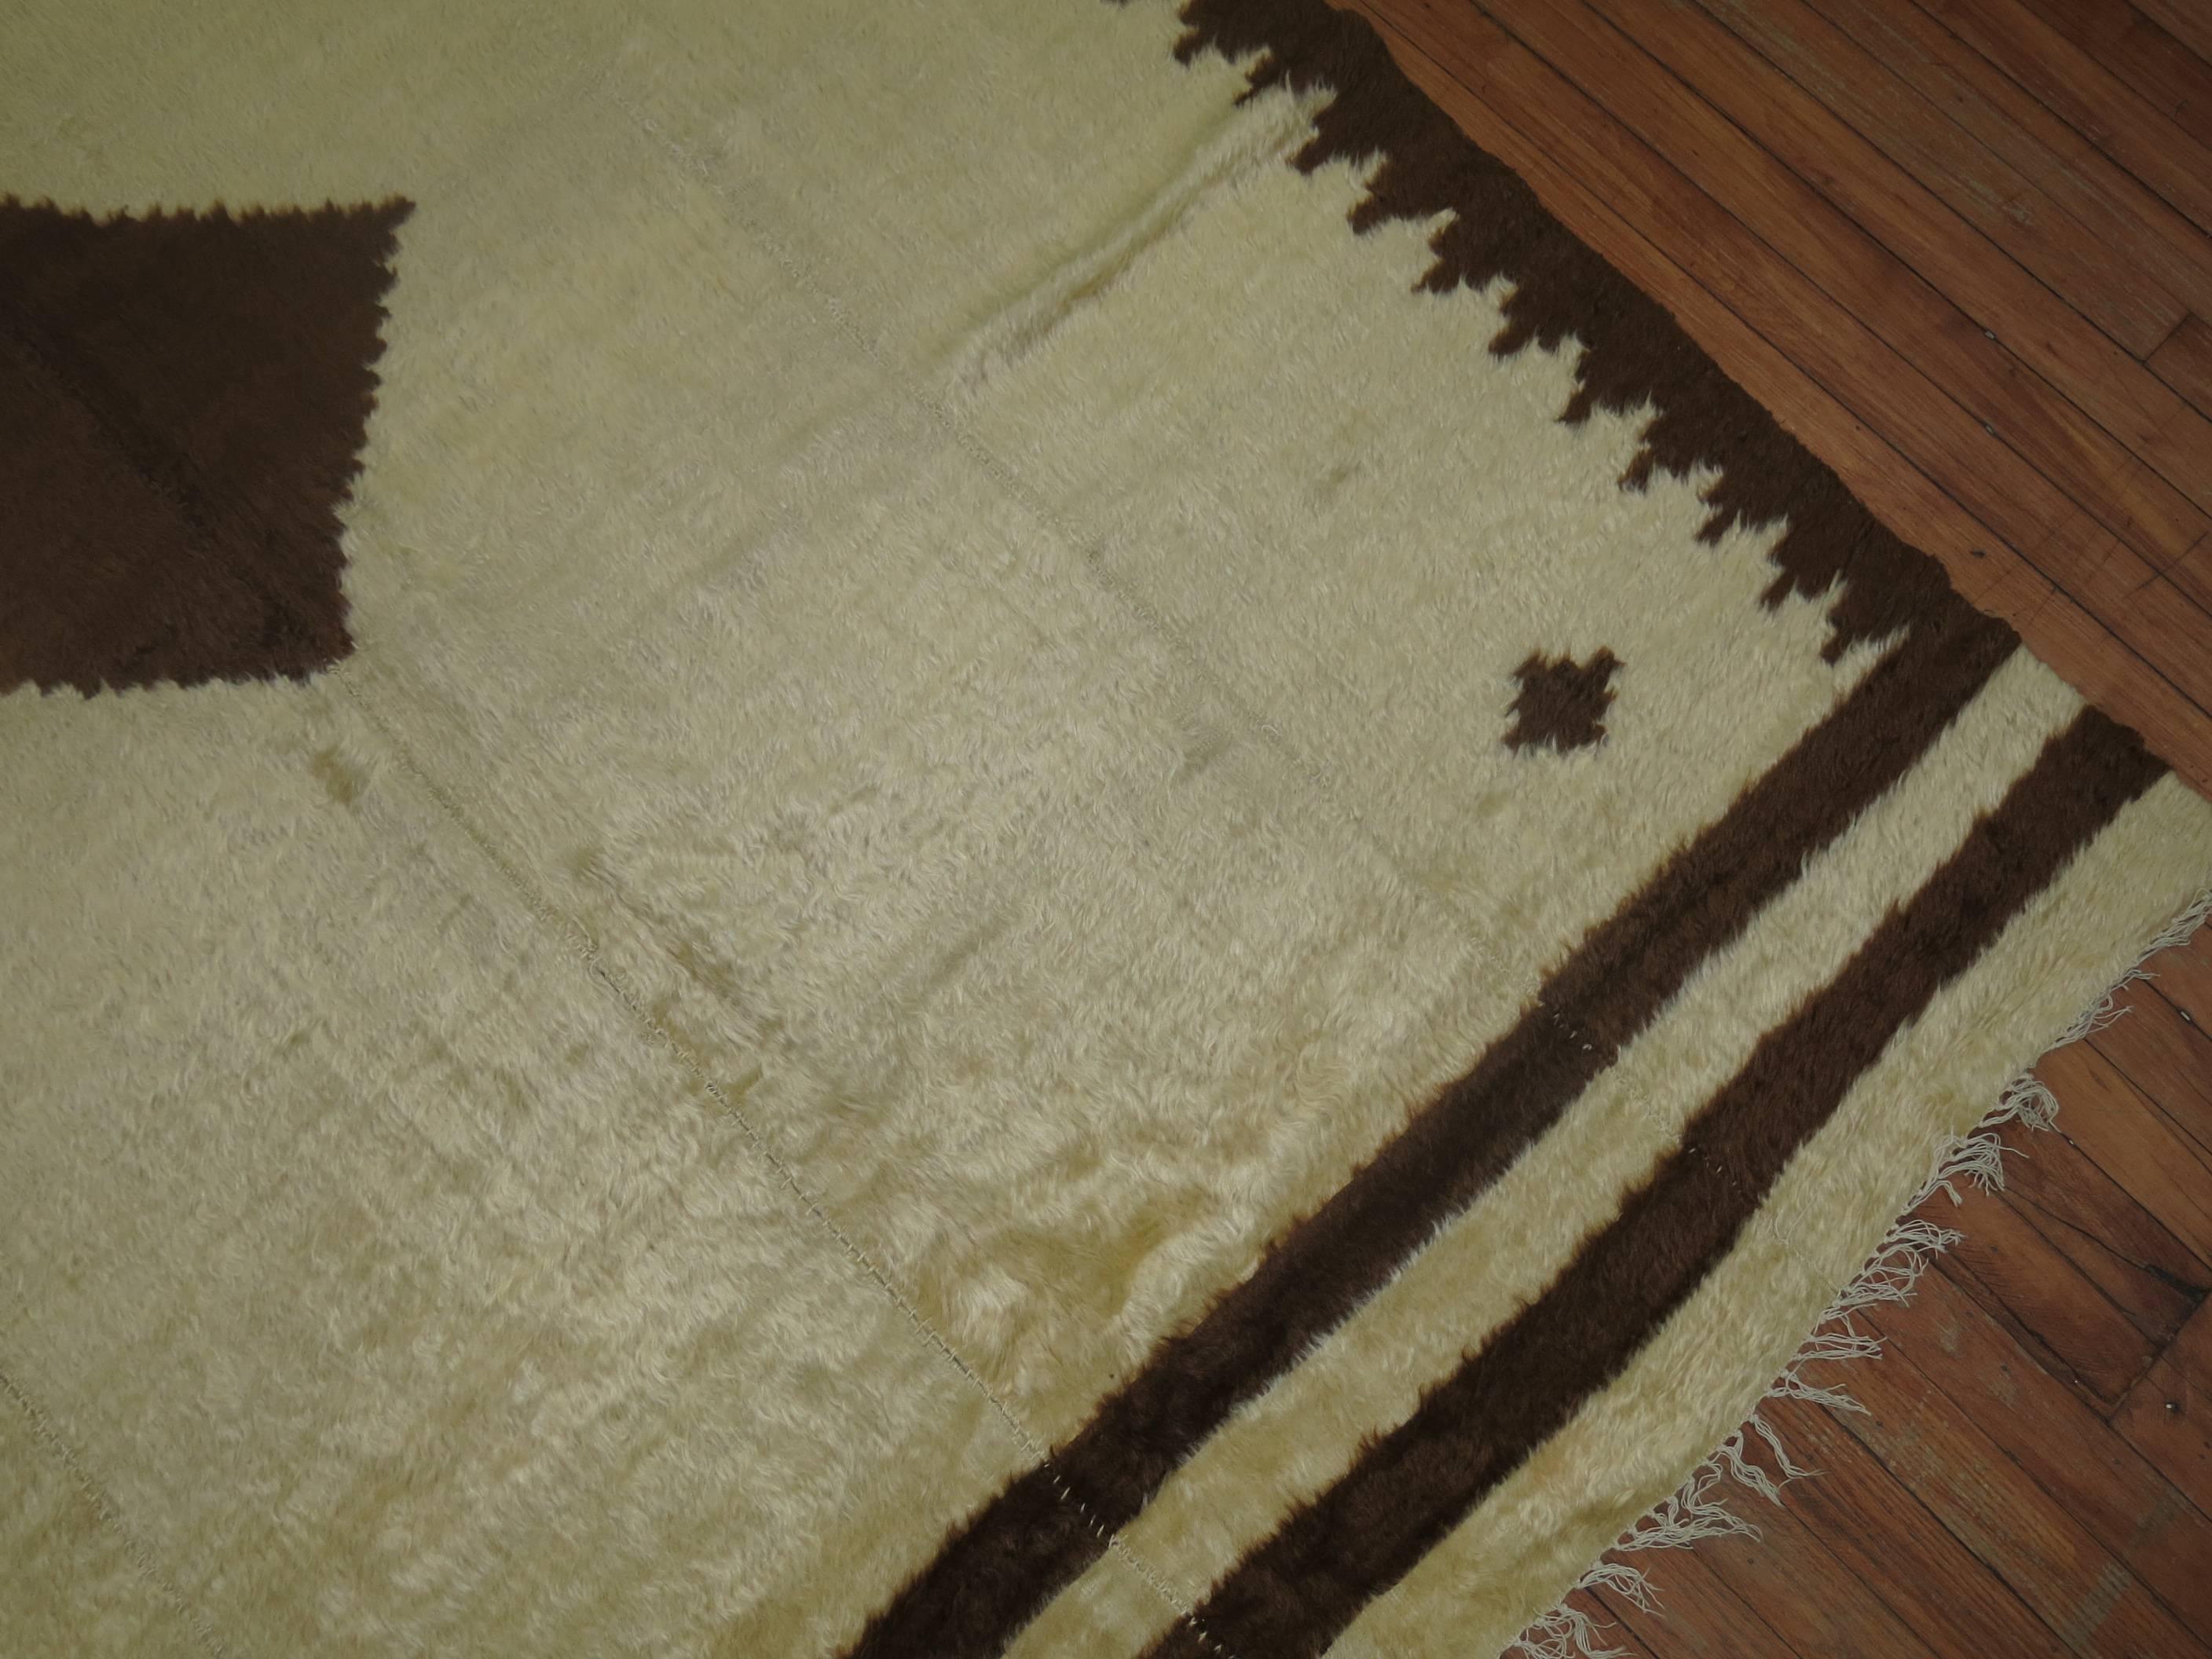 From Eastern Turkey this piece was made with soft Angora goat hair woven in four panels on a narrow loom in ivory and brown. Can be used as a blanket or a floor rug in a low or high traffic area.